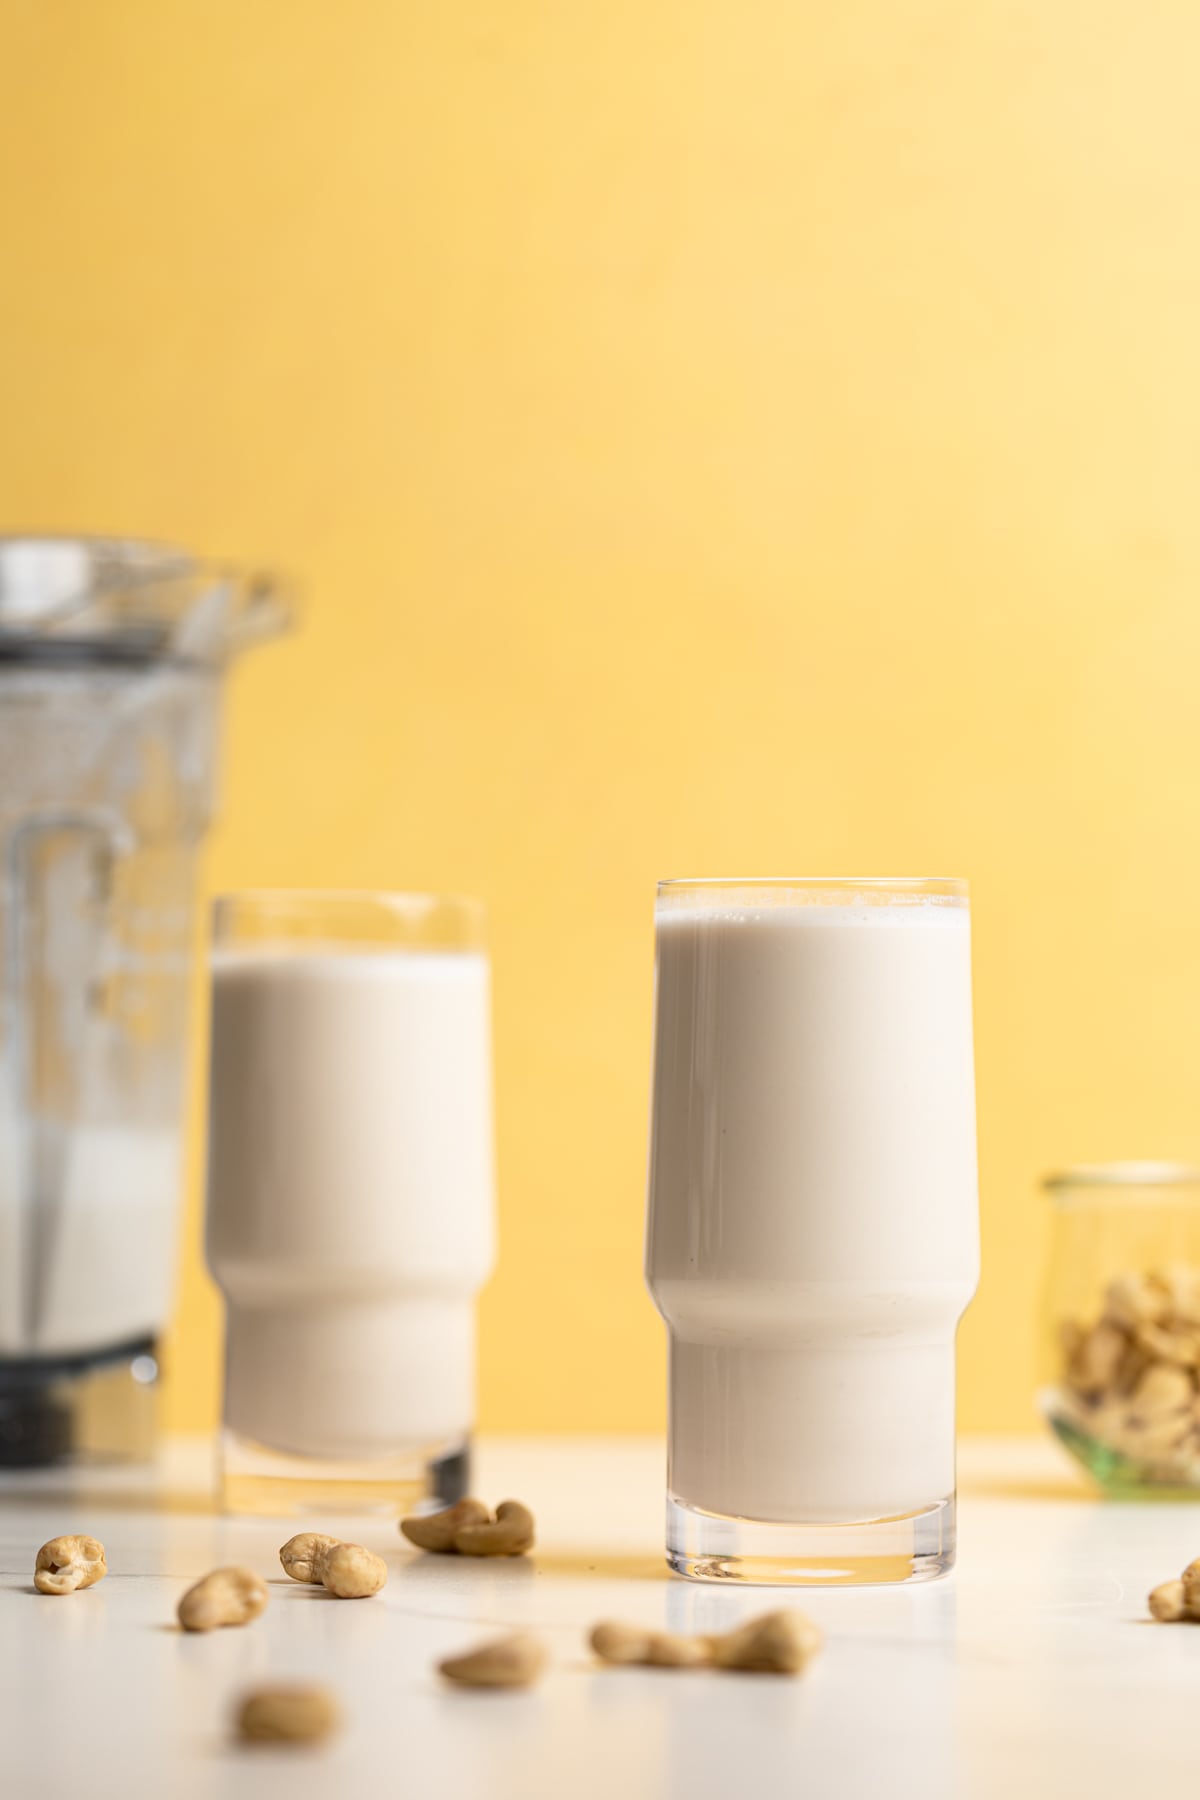 Two tall glasses of Creamy Cashew Milk against a yellow background